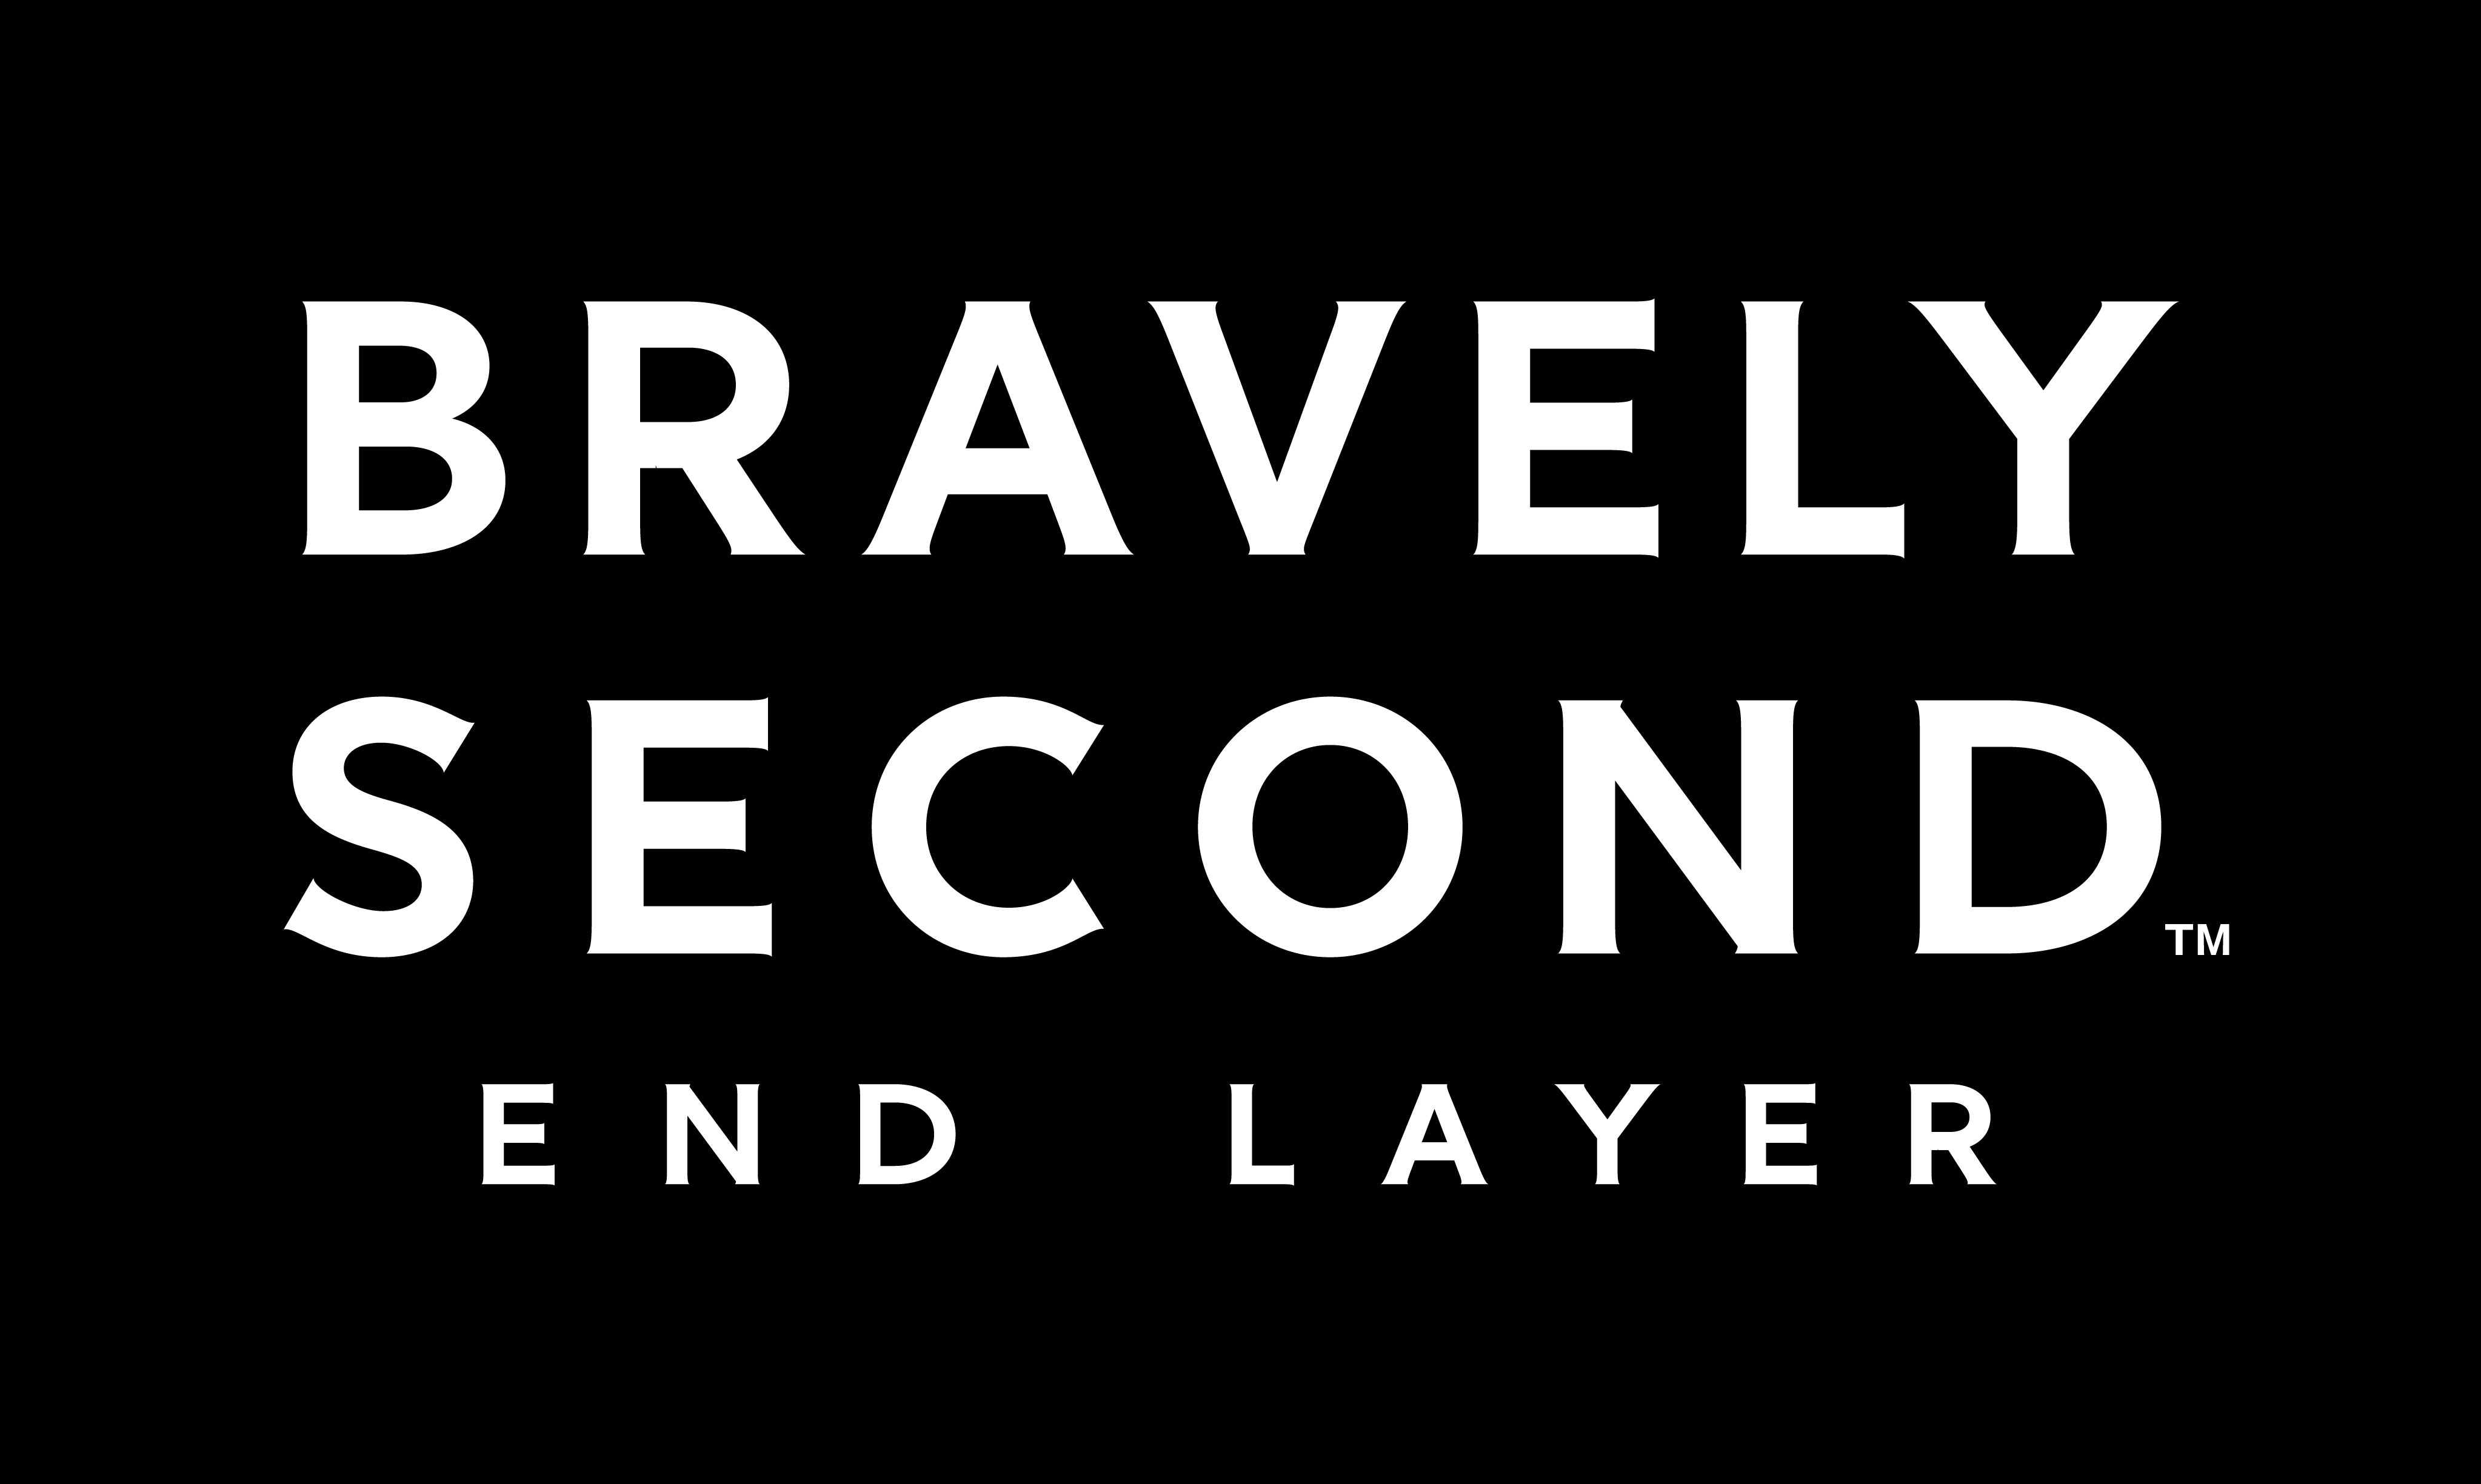 “Bravely Second” - Denials, Quarries, and Gravies: Silicon Studio Braves Its Way to Bravely Second